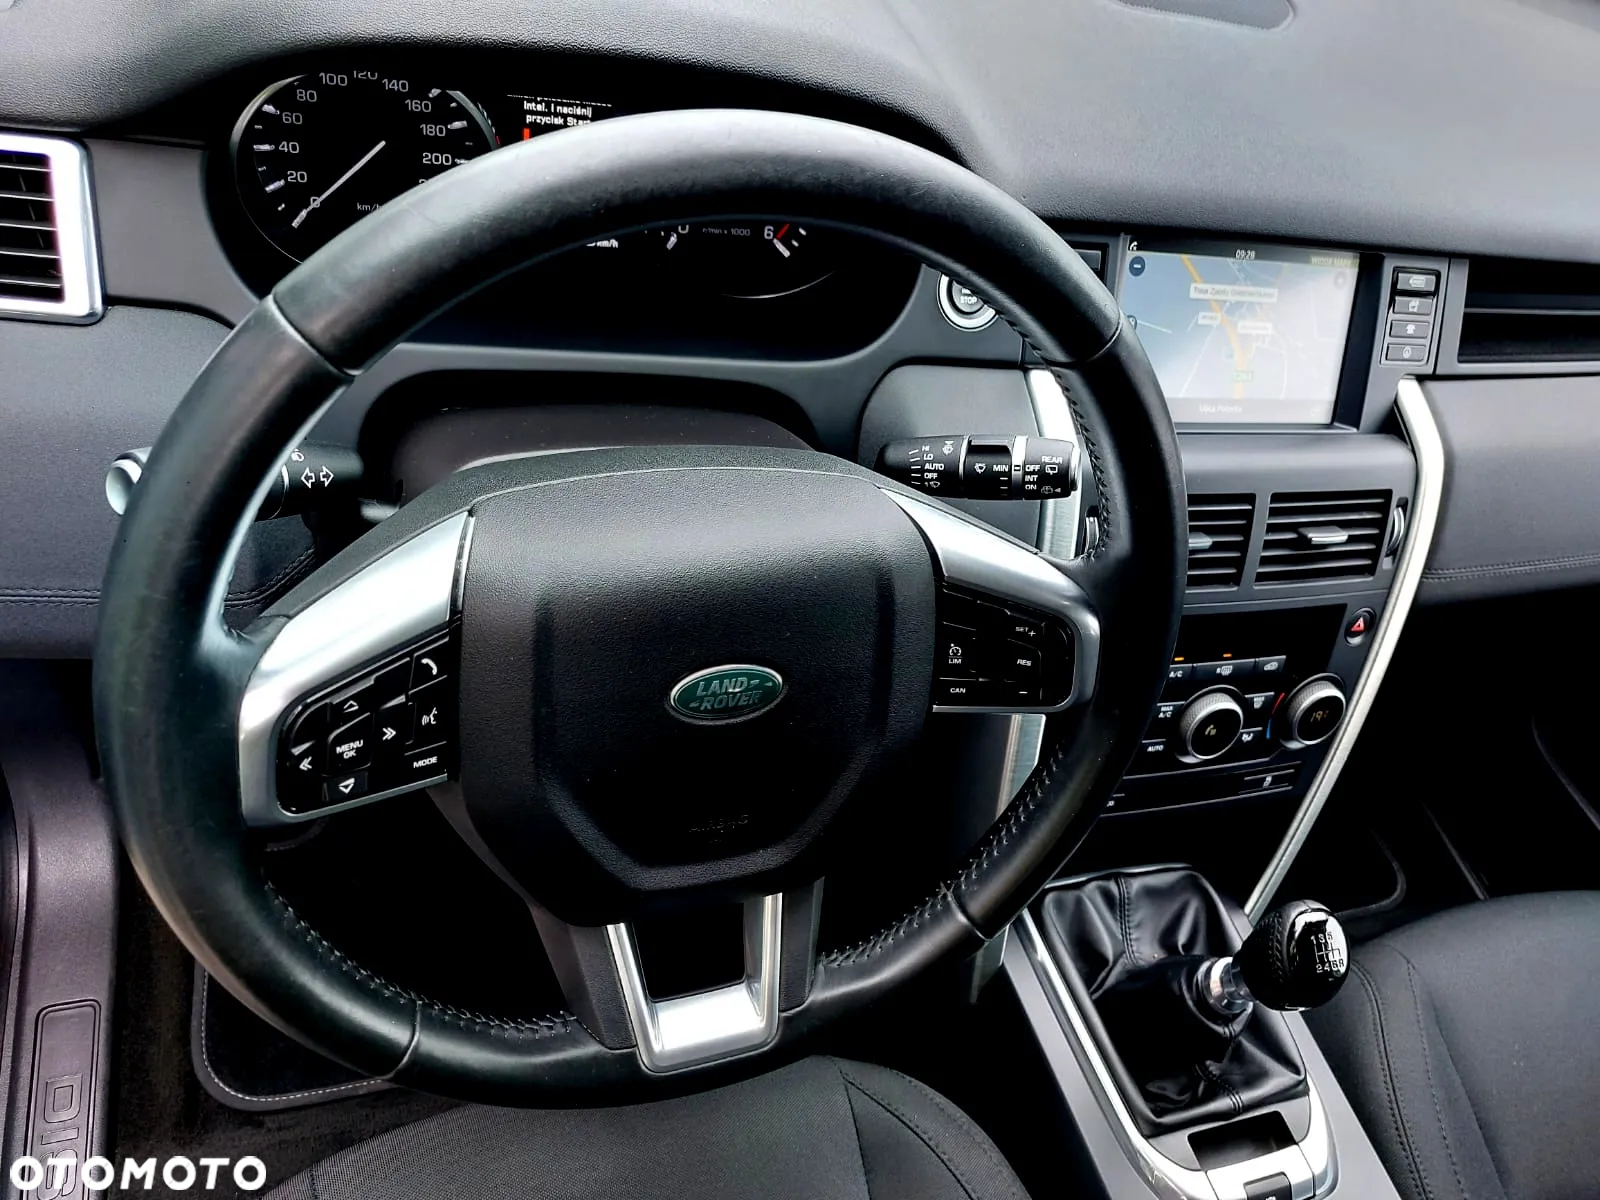 Land Rover Discovery Sport - 8